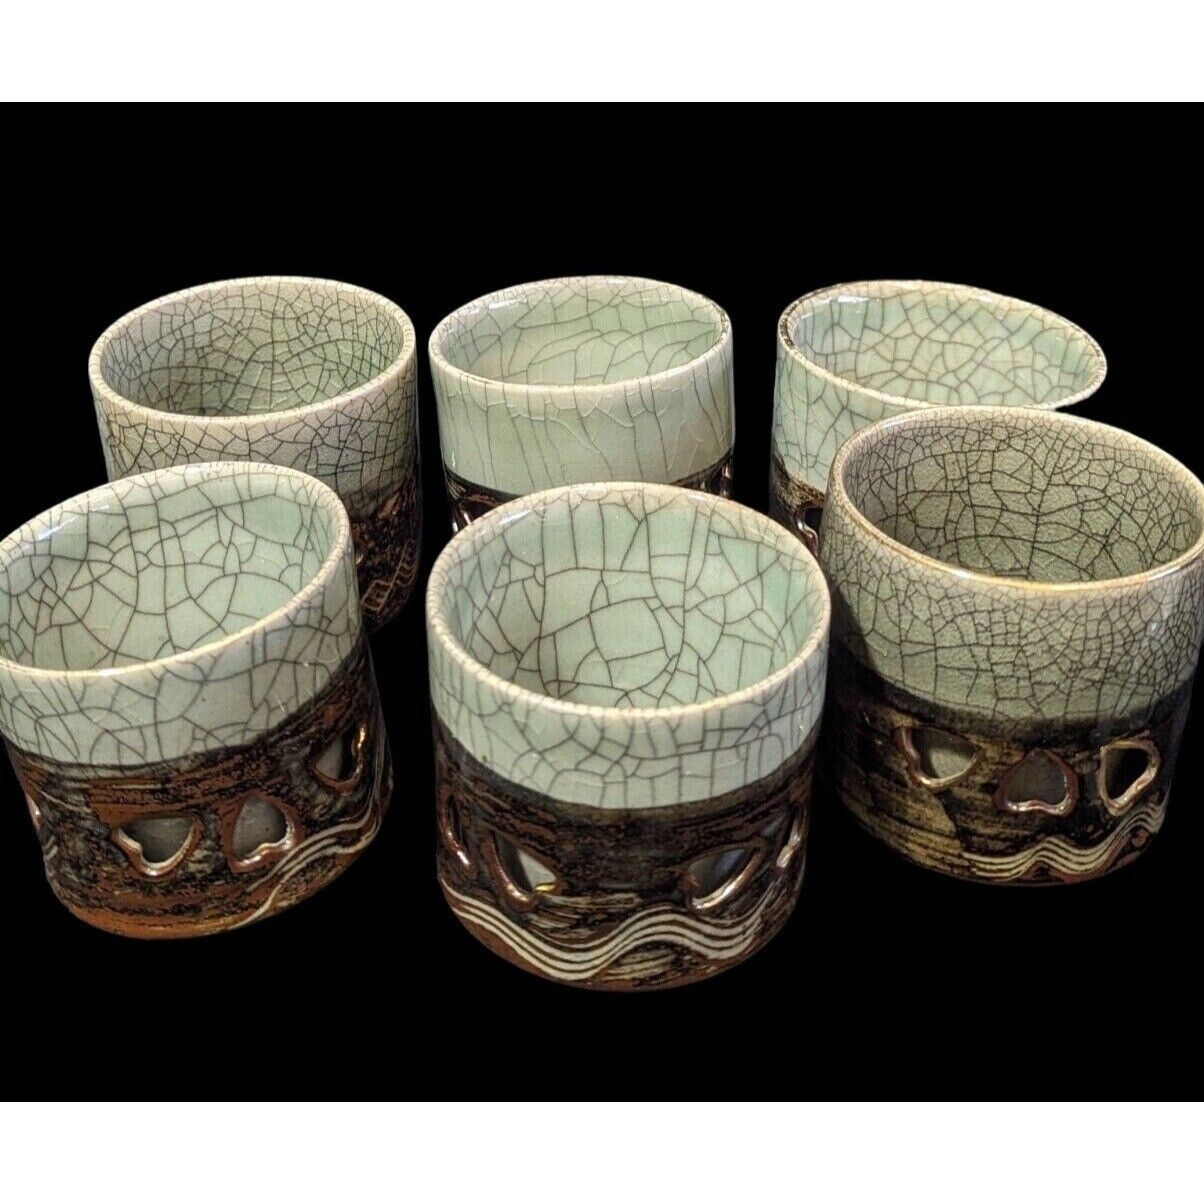 Obori Somayaki Pottery Drinking Set (6) And Saucers (4) Brown and Grey Crackle